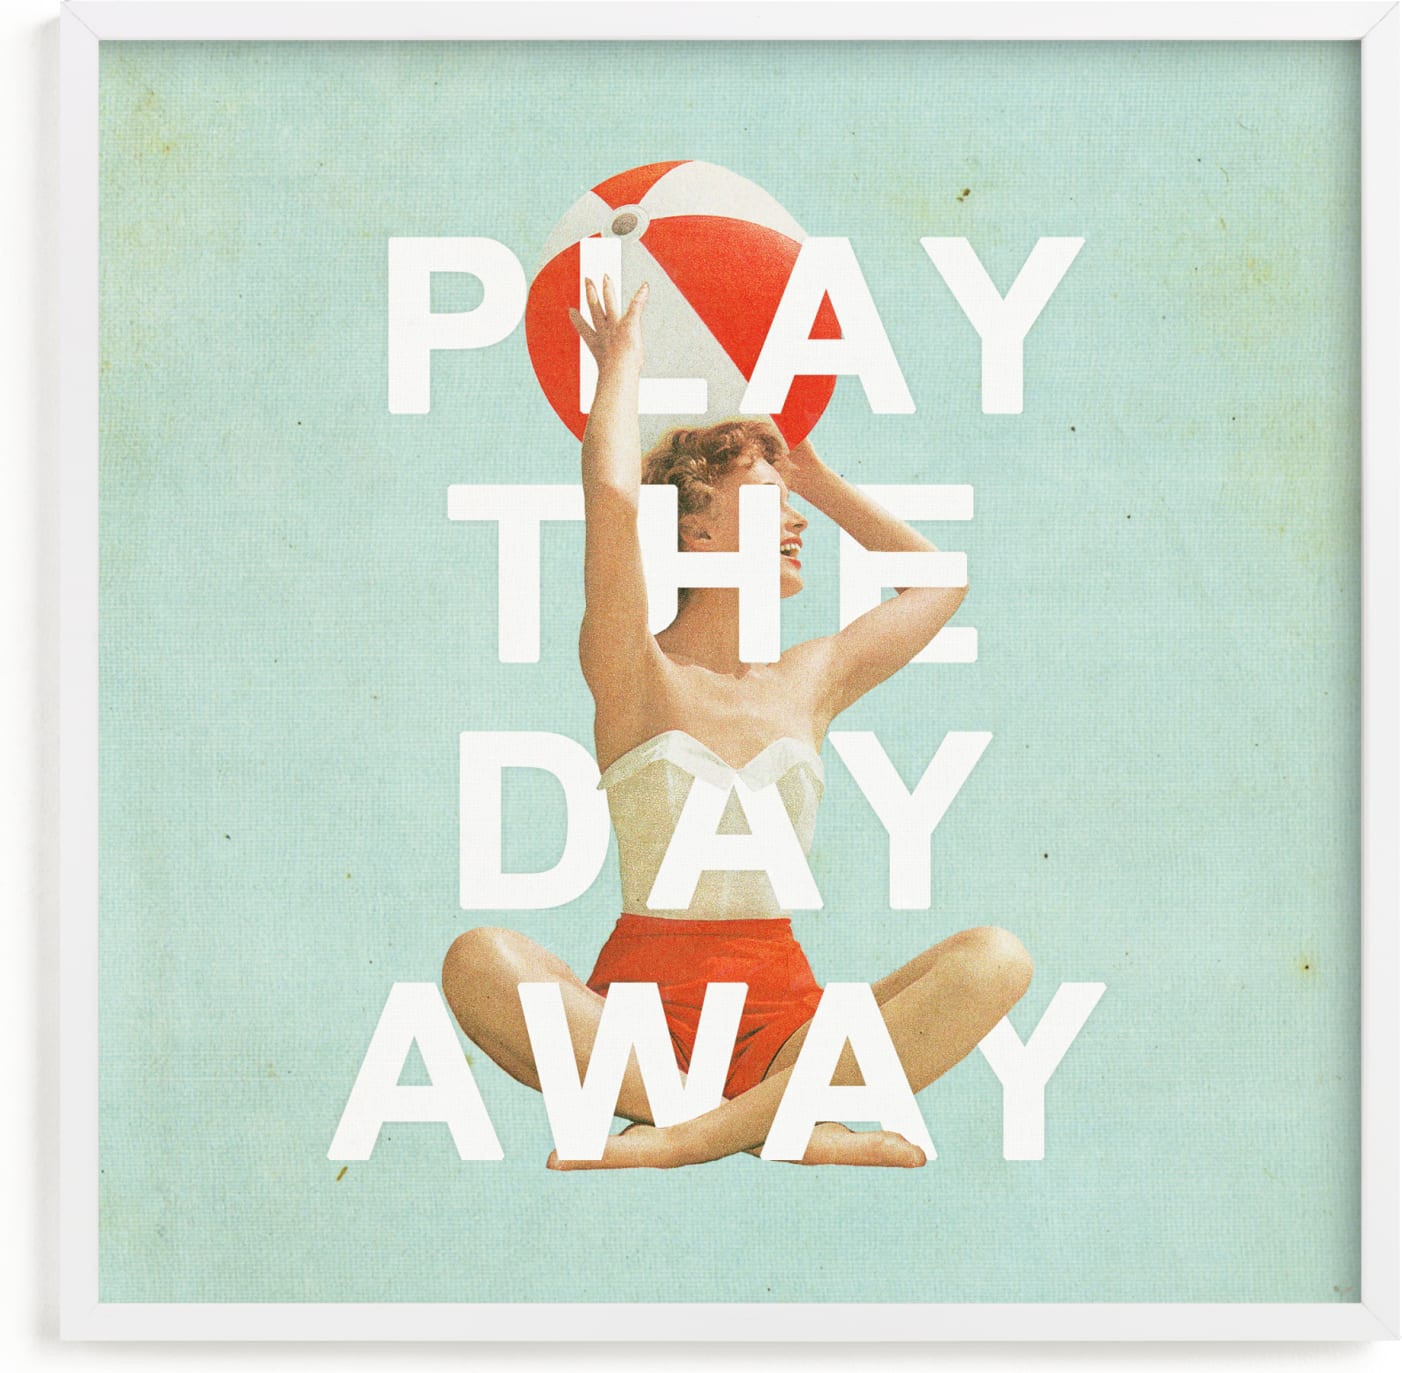 This is a blue, white, red art by Heather Landis called Play The Day Away.